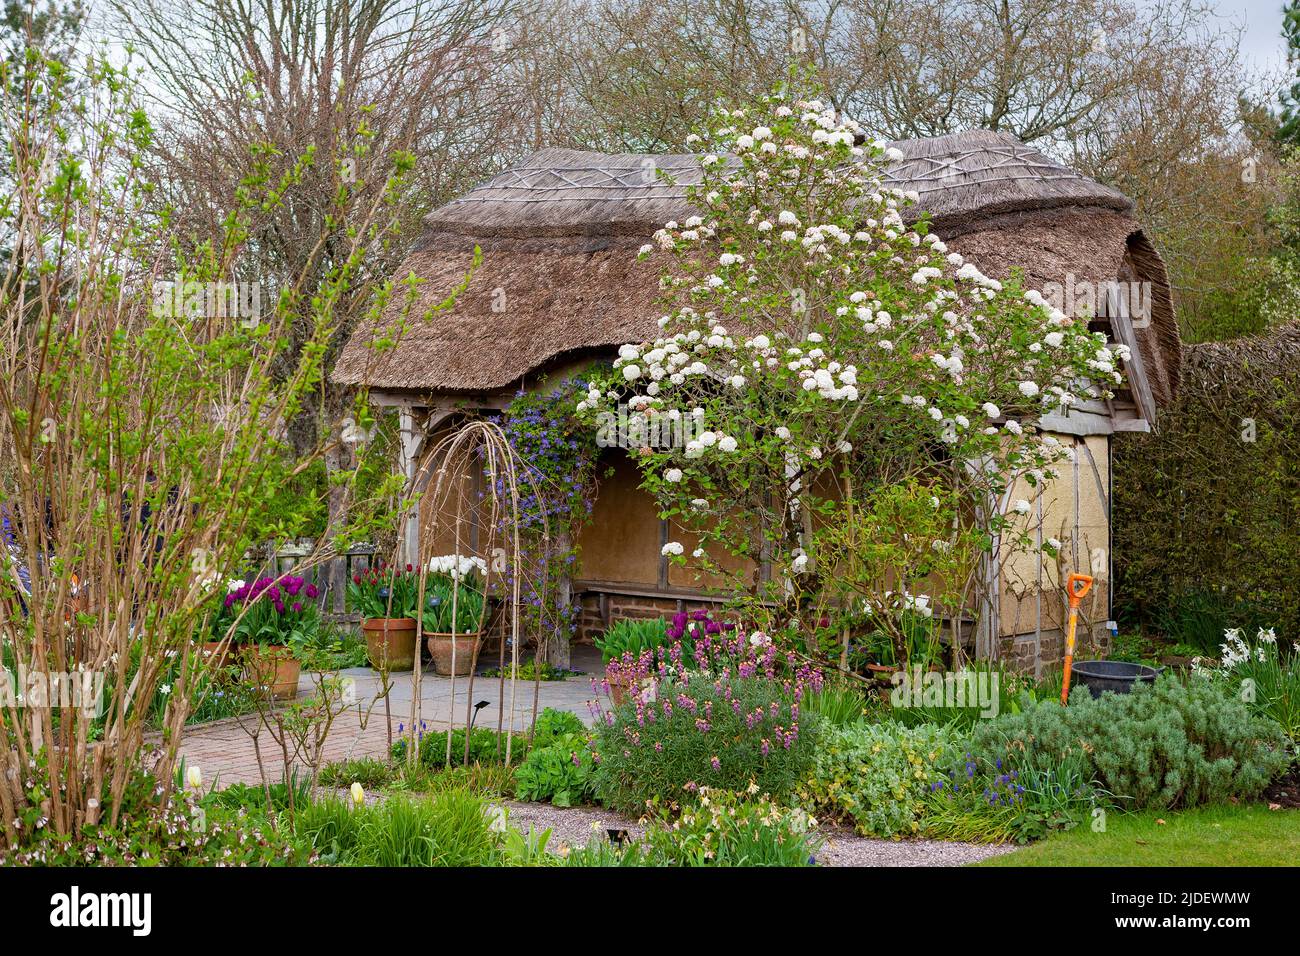 The charming thatched Summer house in The Potager and Cottage Garden, RHS Rosemoor, Devon, UK Stock Photo